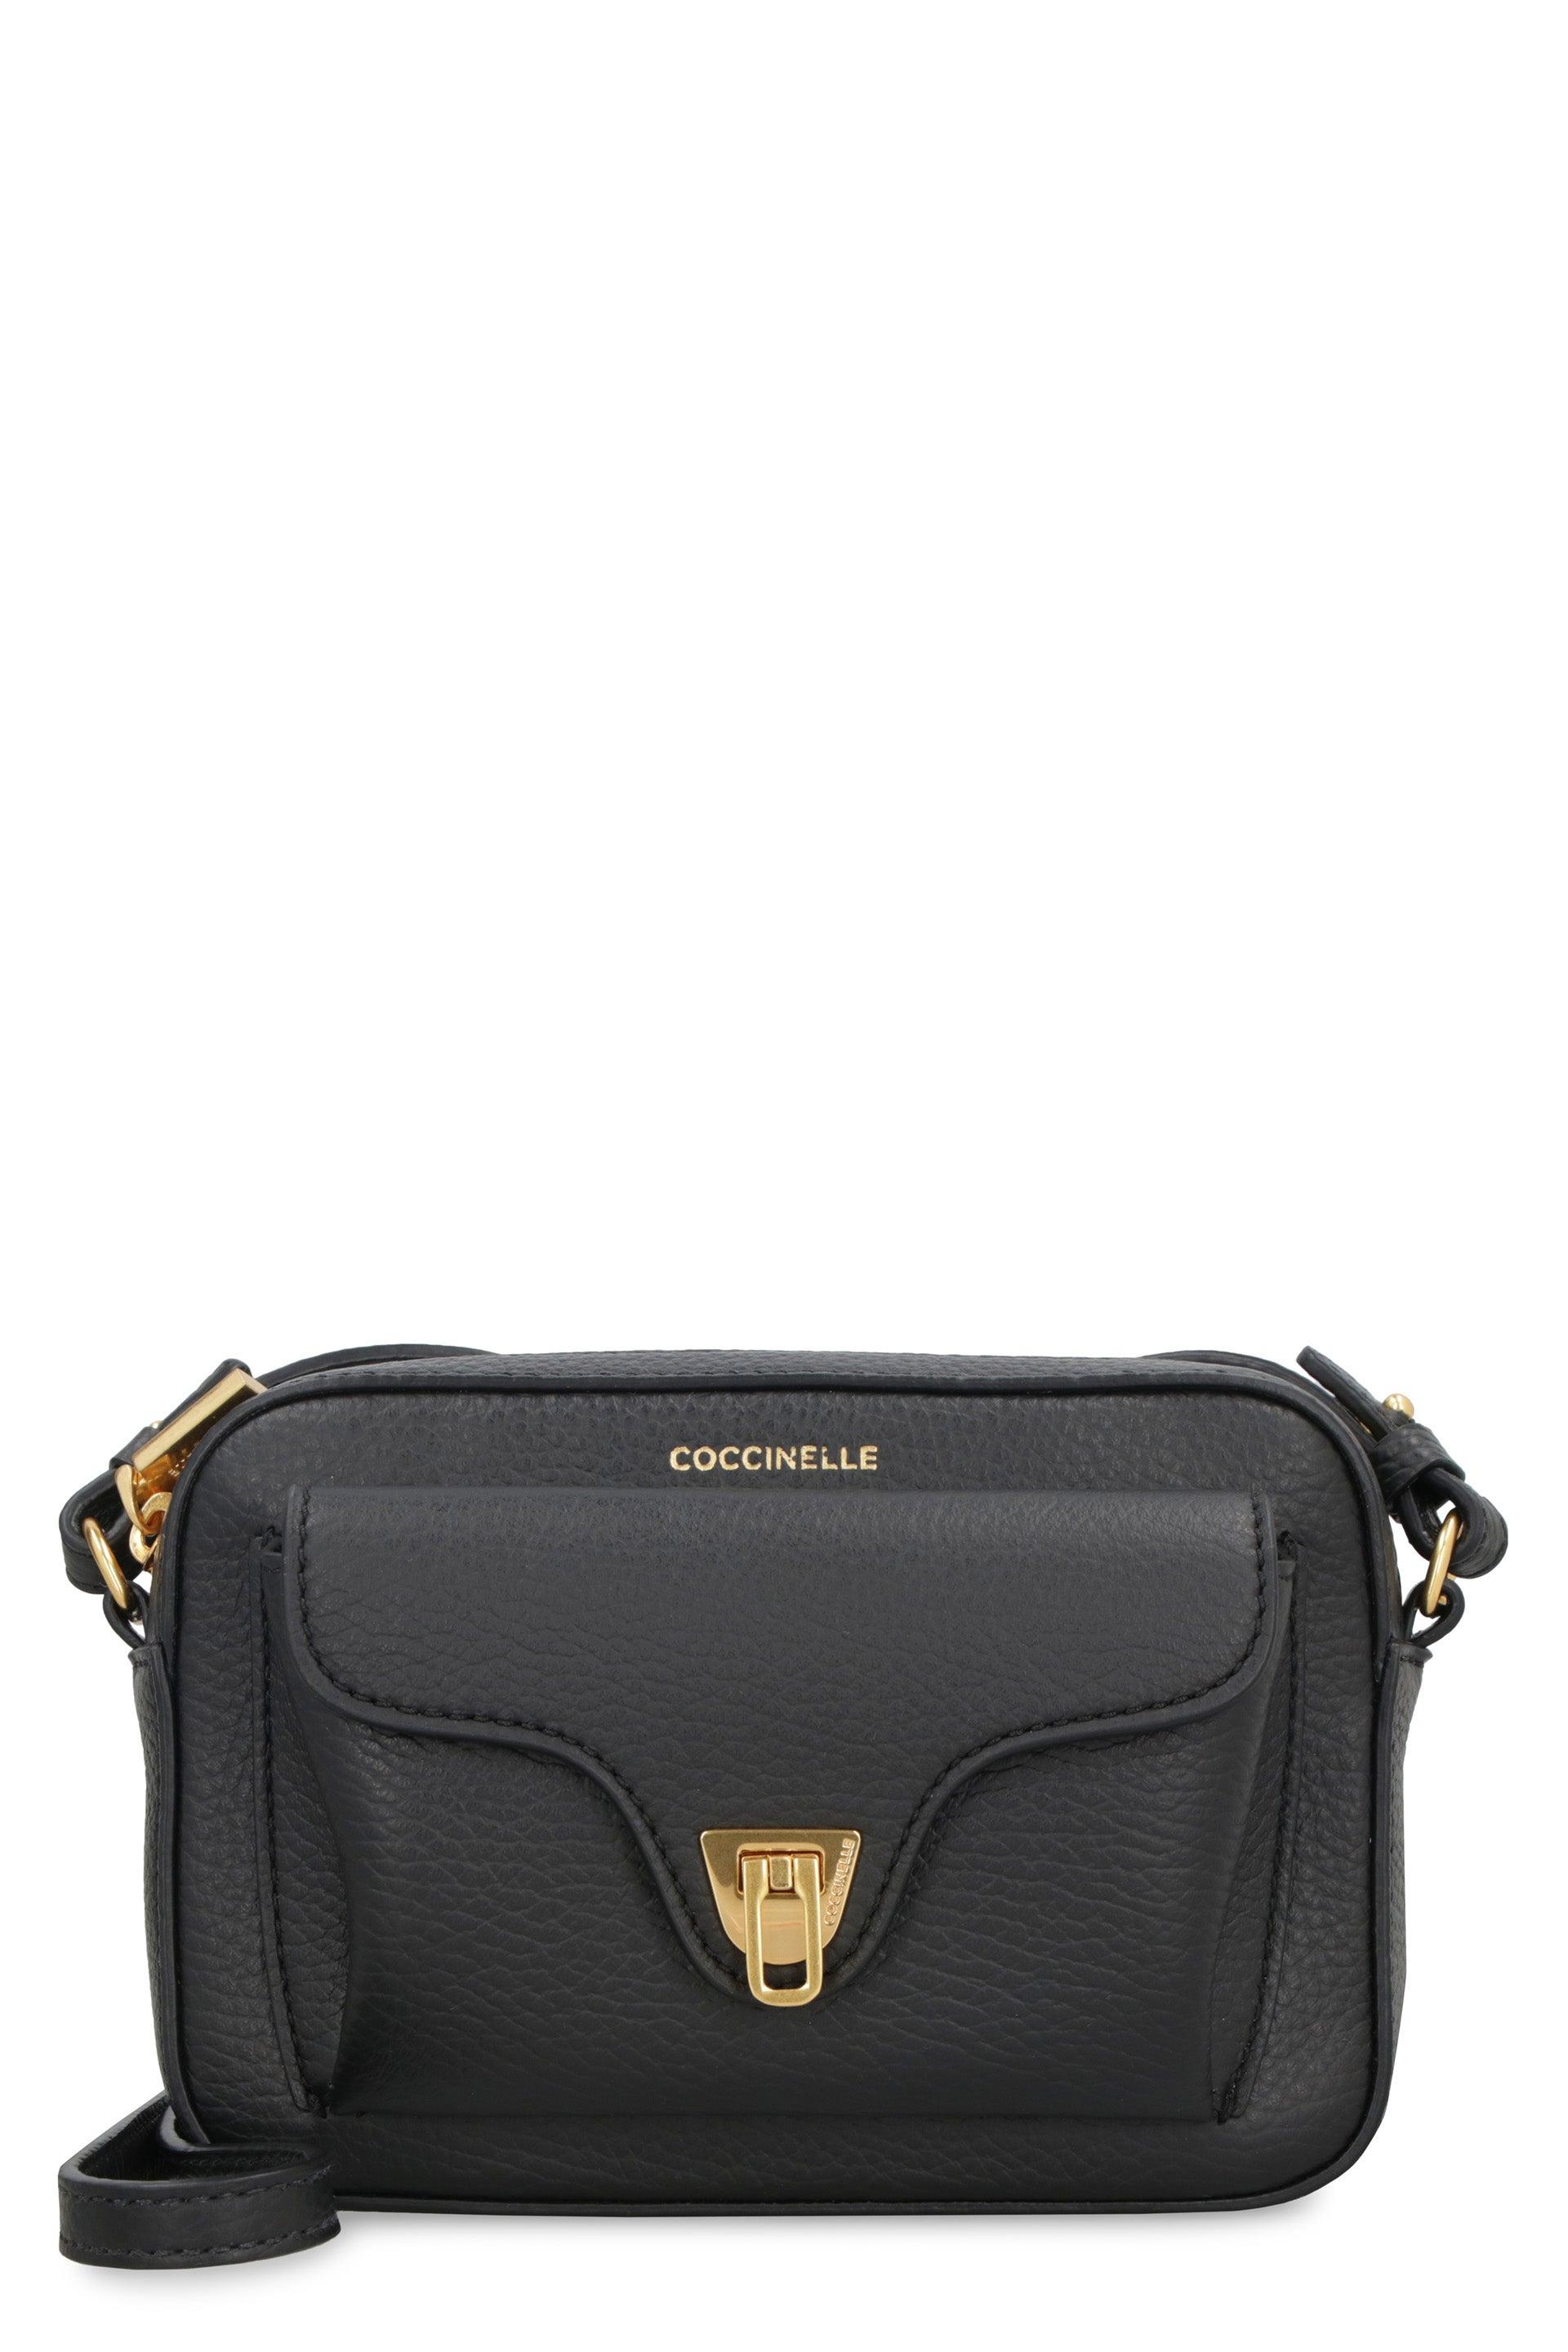 Coccinelle Beat Soft Mini Leather Crossbody Bag in Black | Lyst